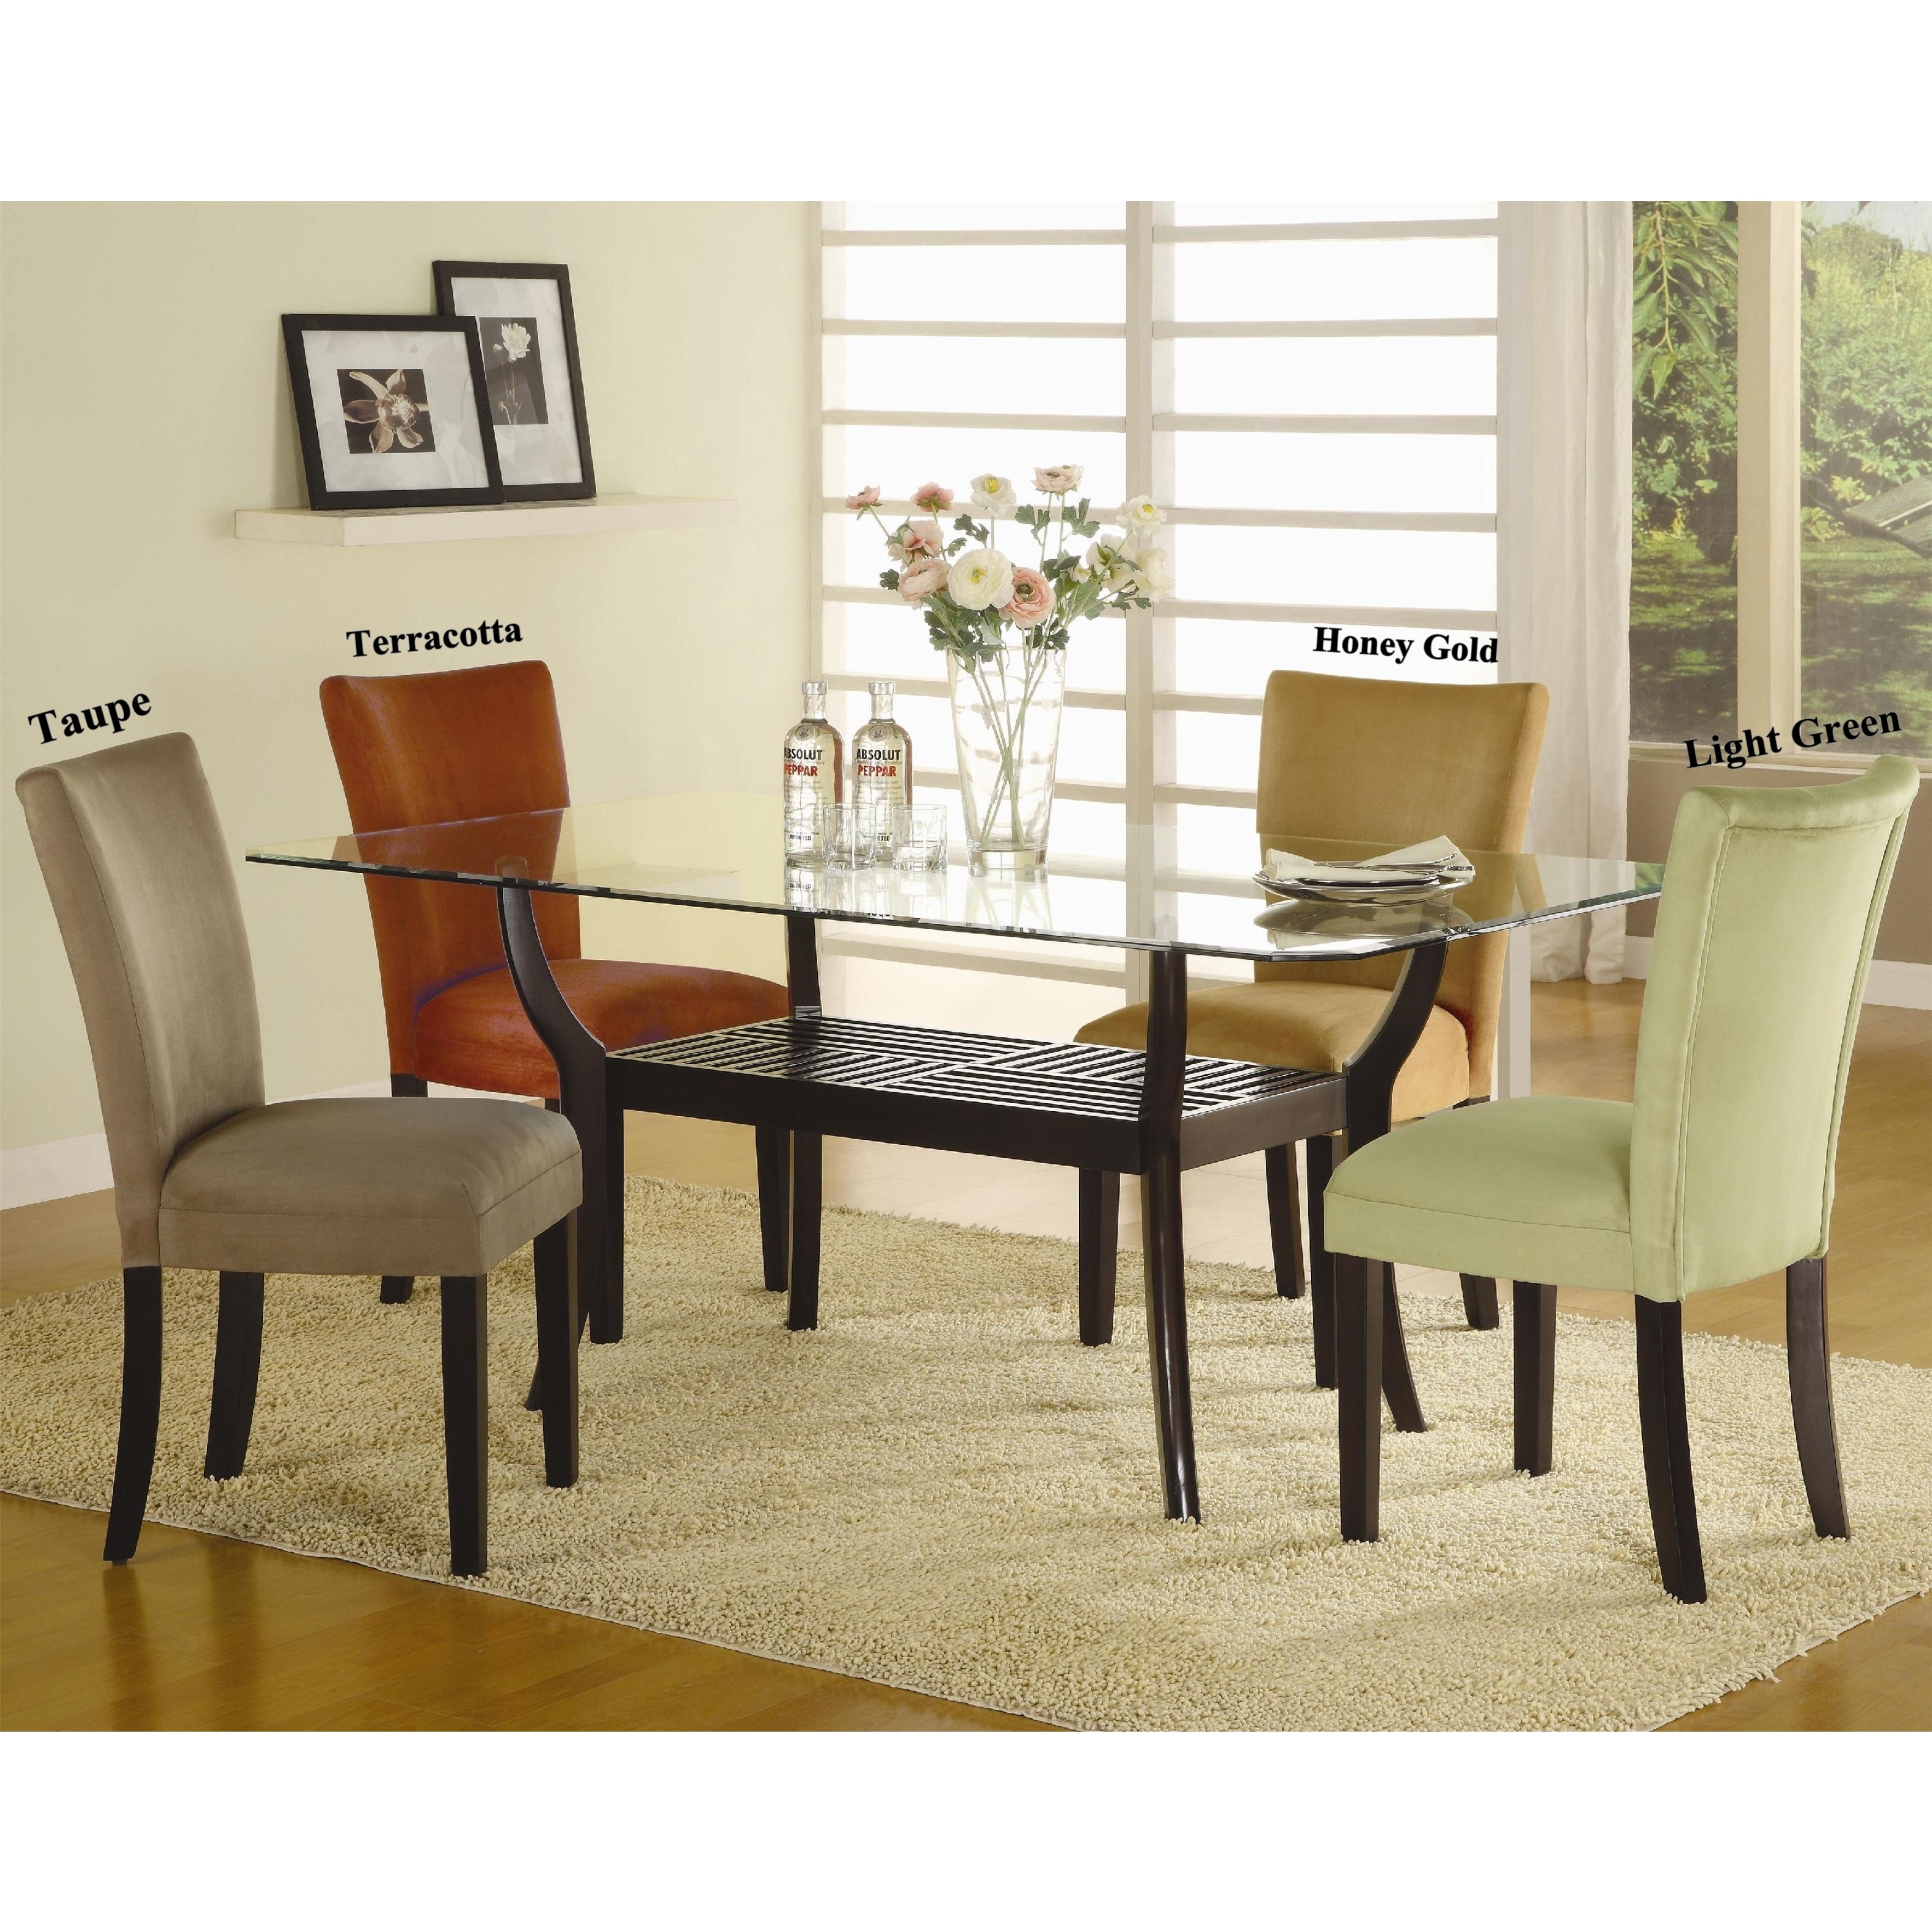 Shop Mirage Microfiber Parson Chairs Set Of Free Shipping Today